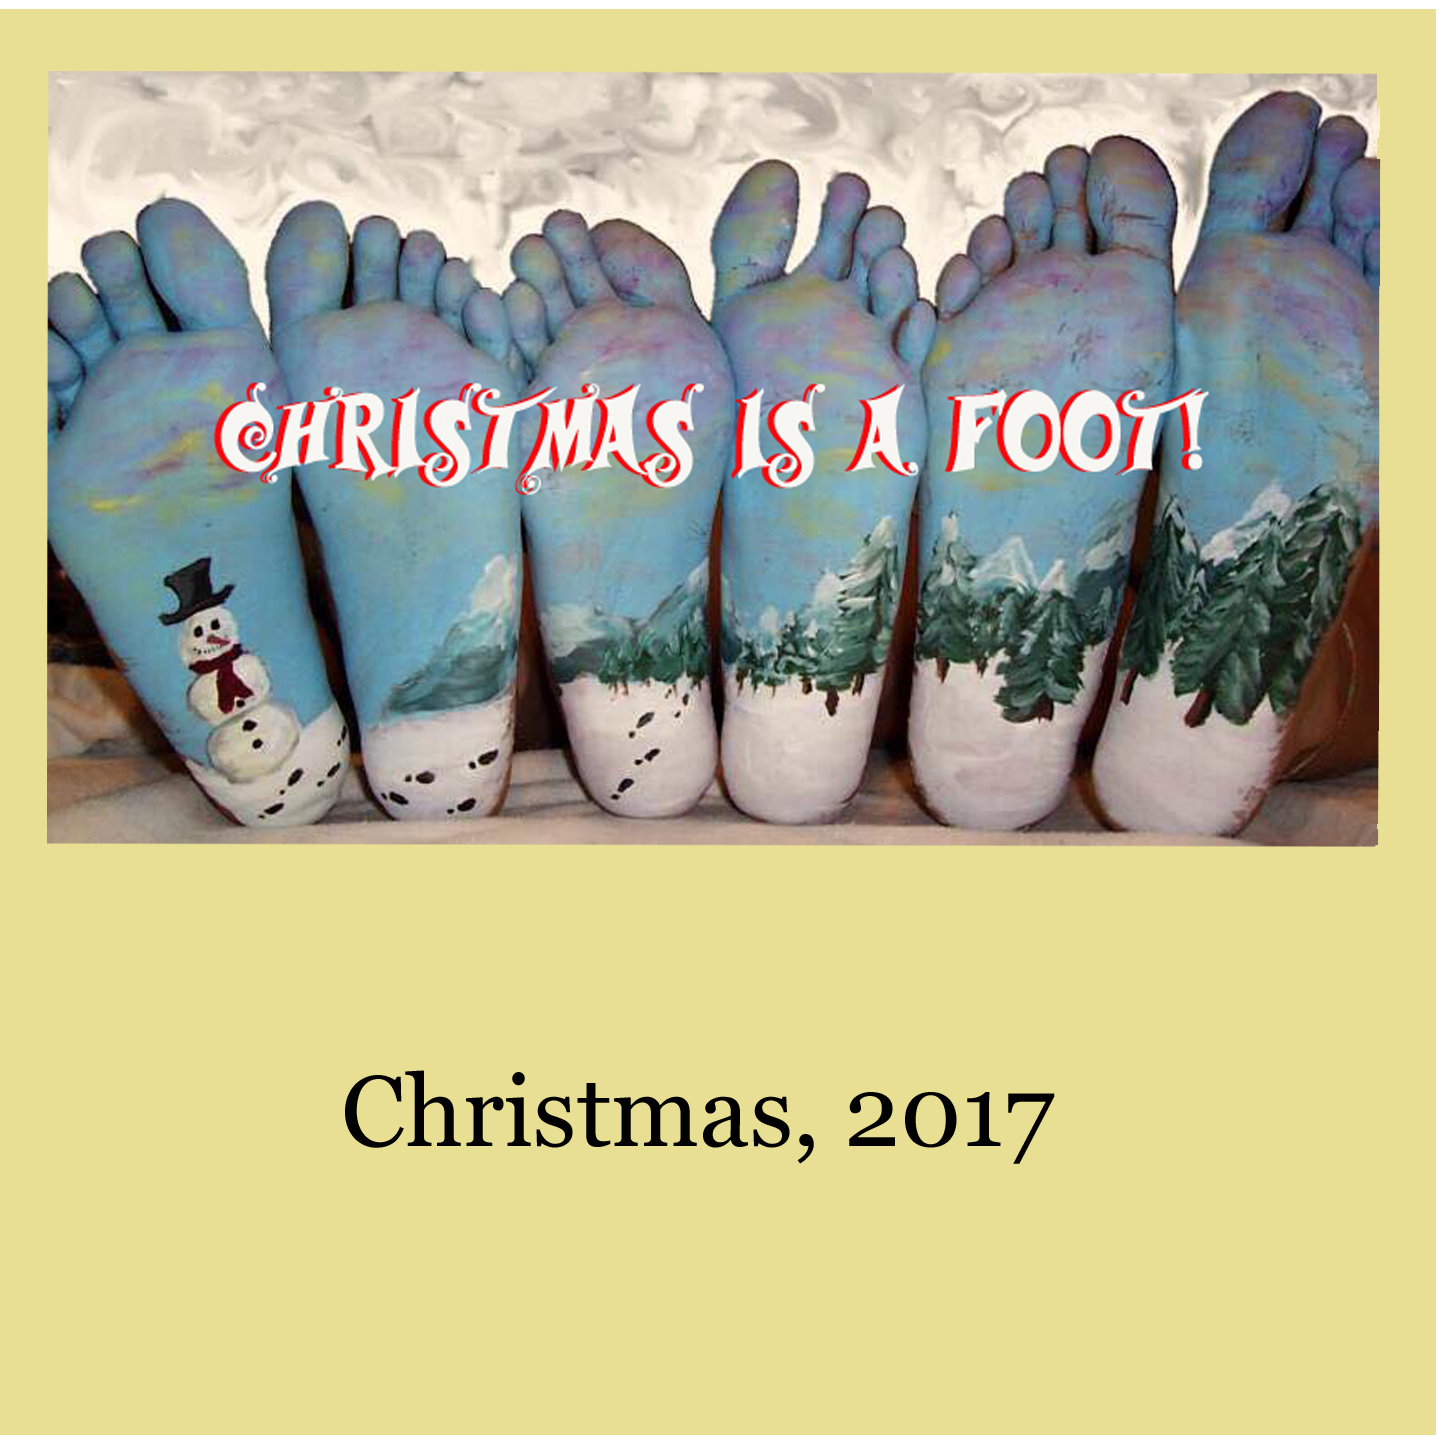 Merry Christmas 2017 from Chandler – Christmas Is A Foot!